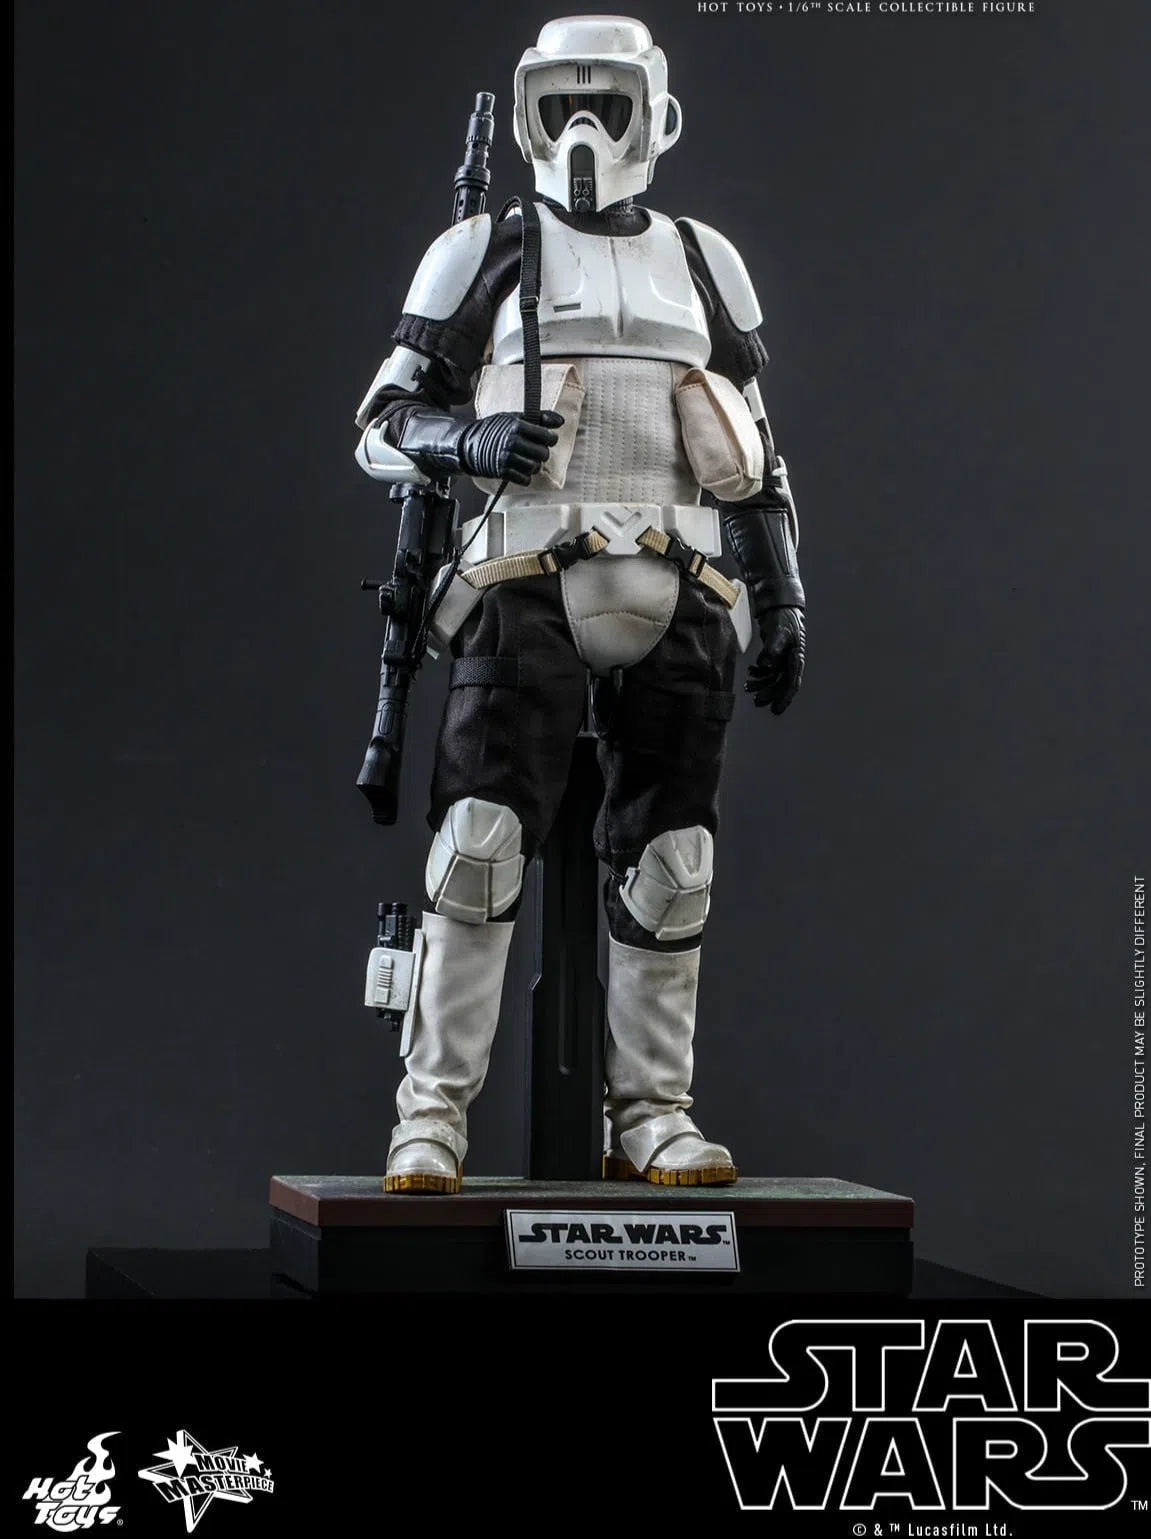 Scout Trooper: Star Wars: Return Of The Jedi: MMS611 Hot Toys